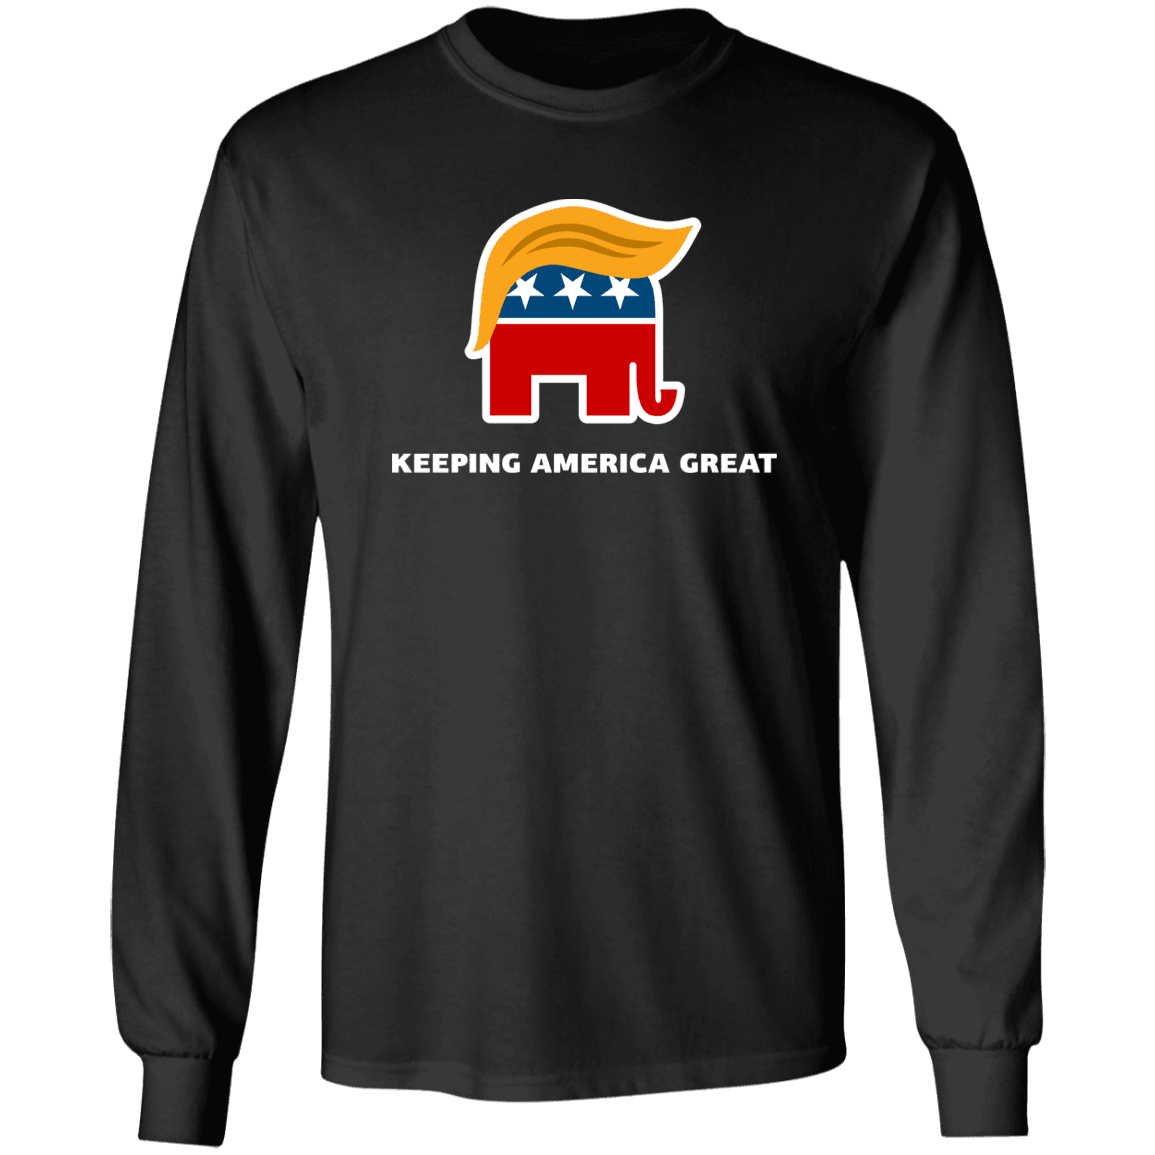 Designs by MyUtopia Shout Out:Trump Keeping America Great Elephant Long Sleeve Ultra Cotton T-Shirt,Black / S,Long Sleeve T-Shirts